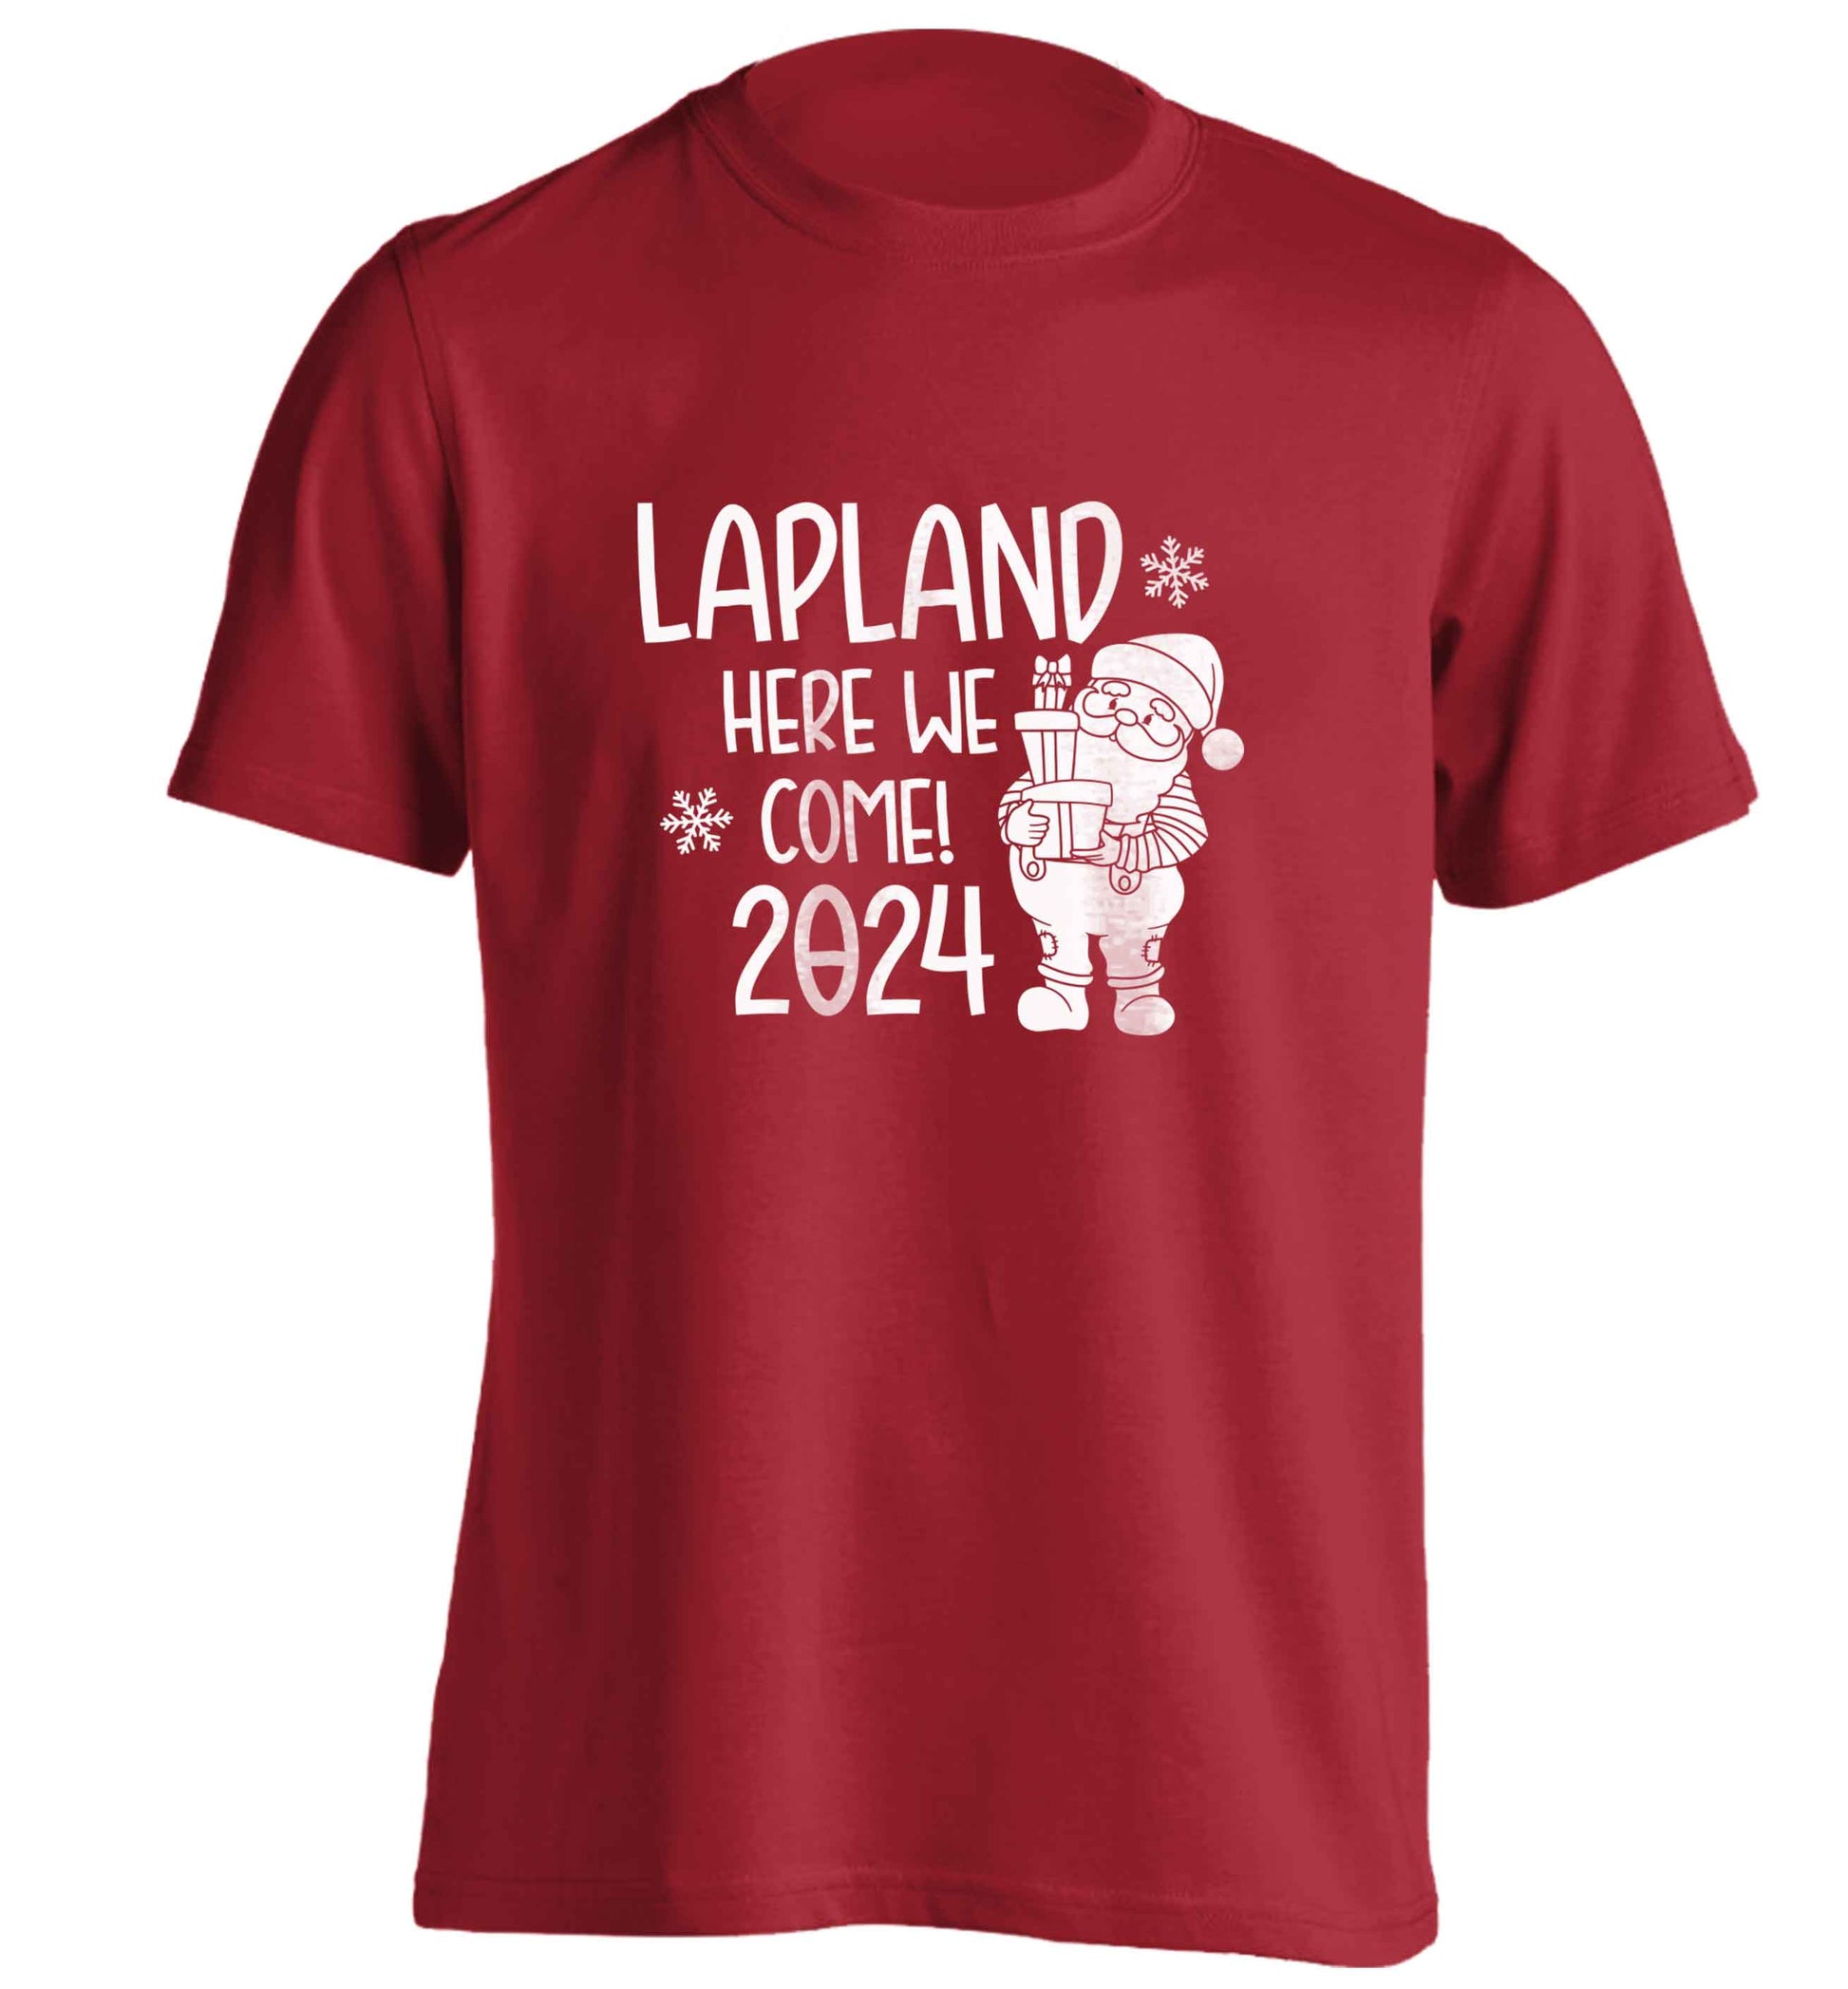 Lapland here we come adults unisex red Tshirt 2XL